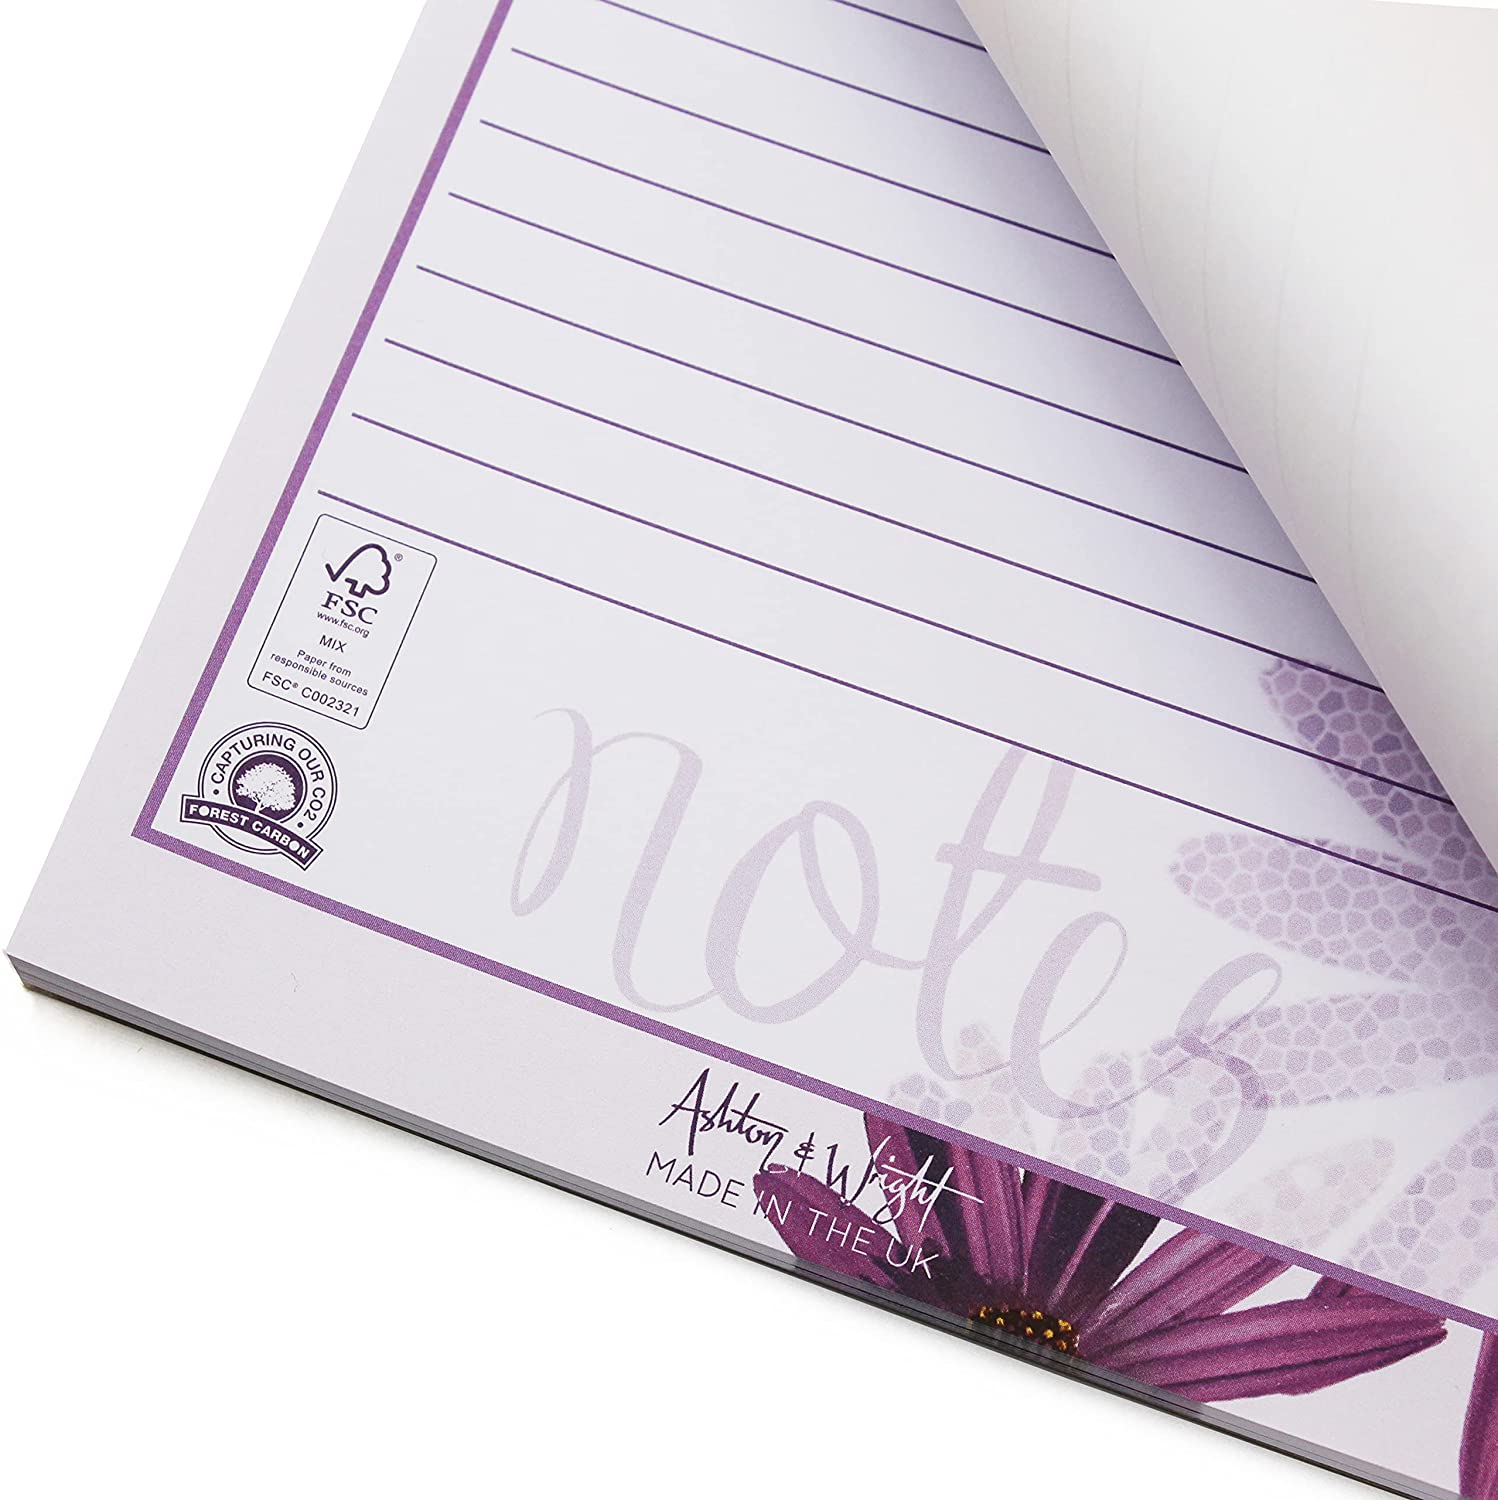 Daily to do Pad - A5 Cape Daisy Desk Planner Organiser